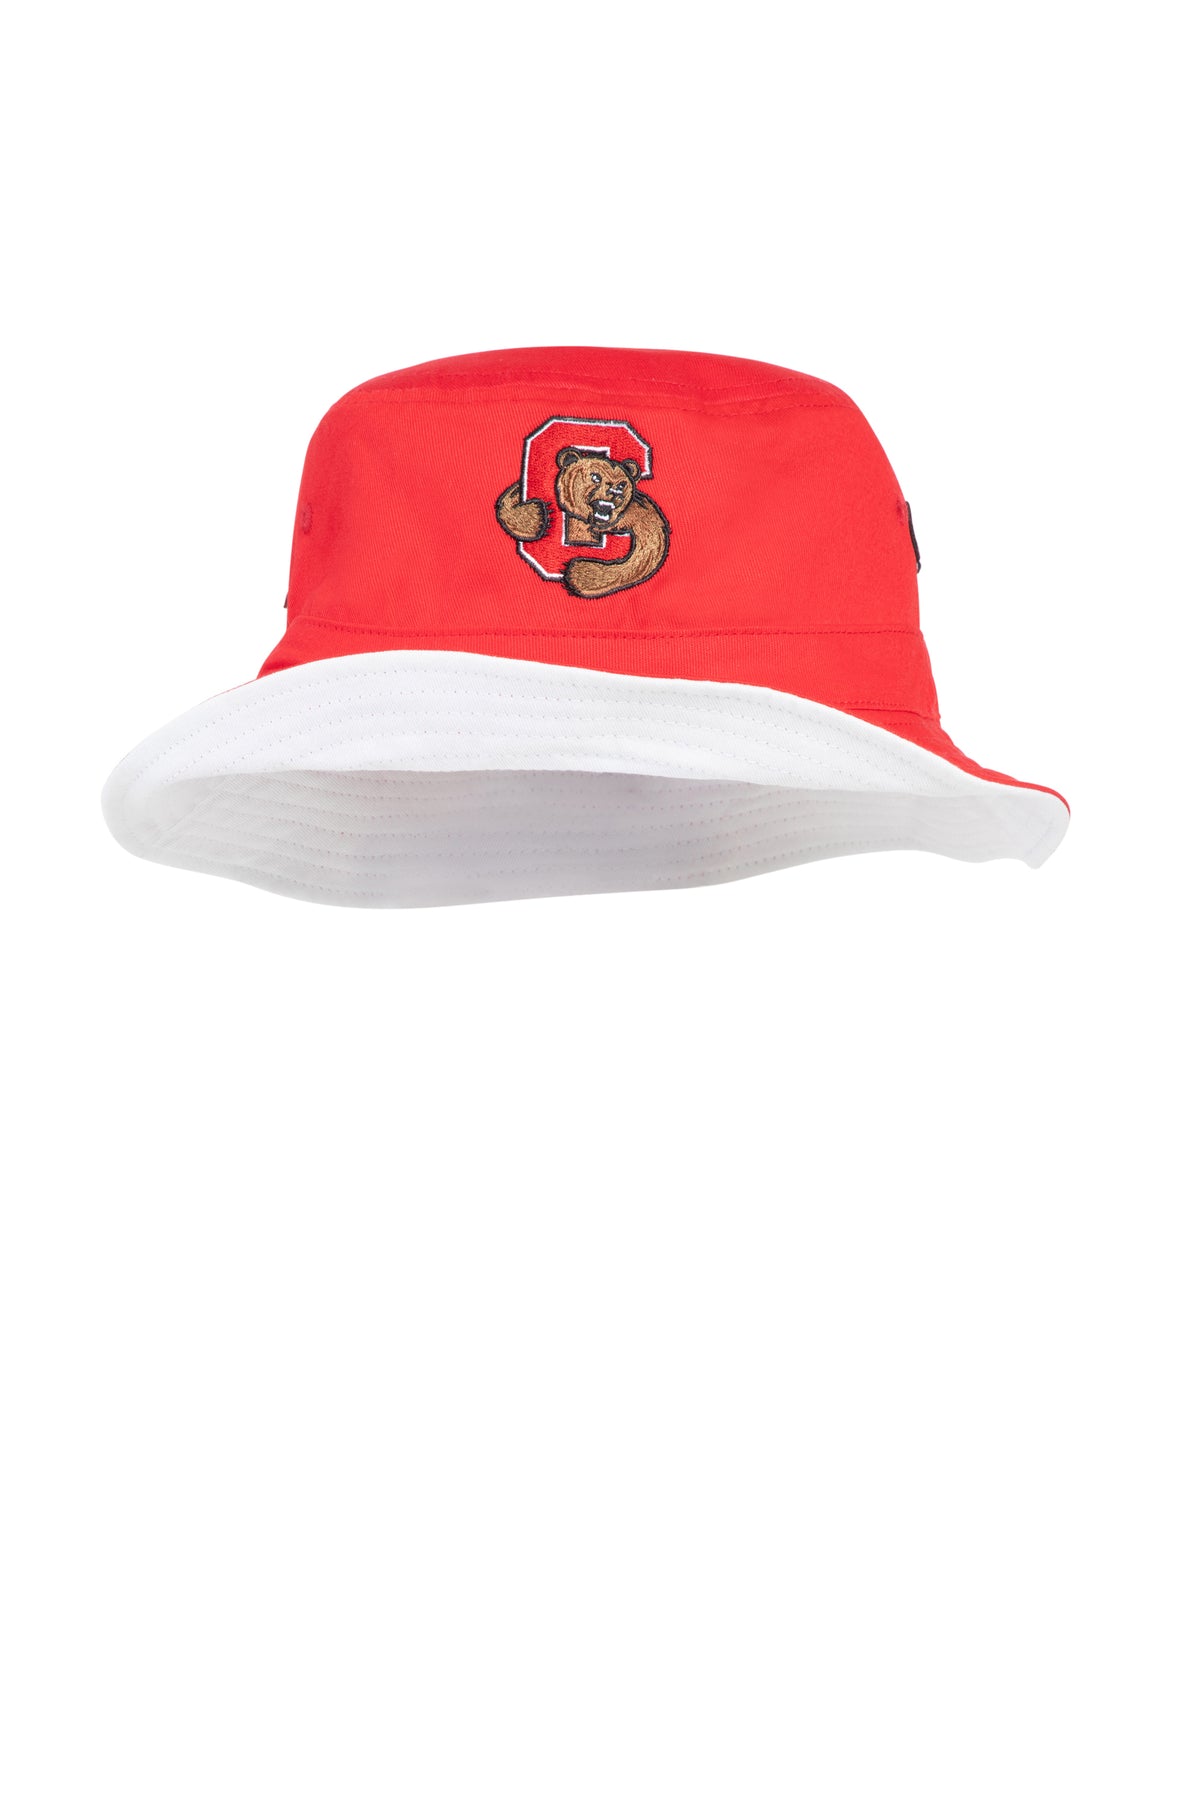 Cornell University Hype and Vice Bucket Hat